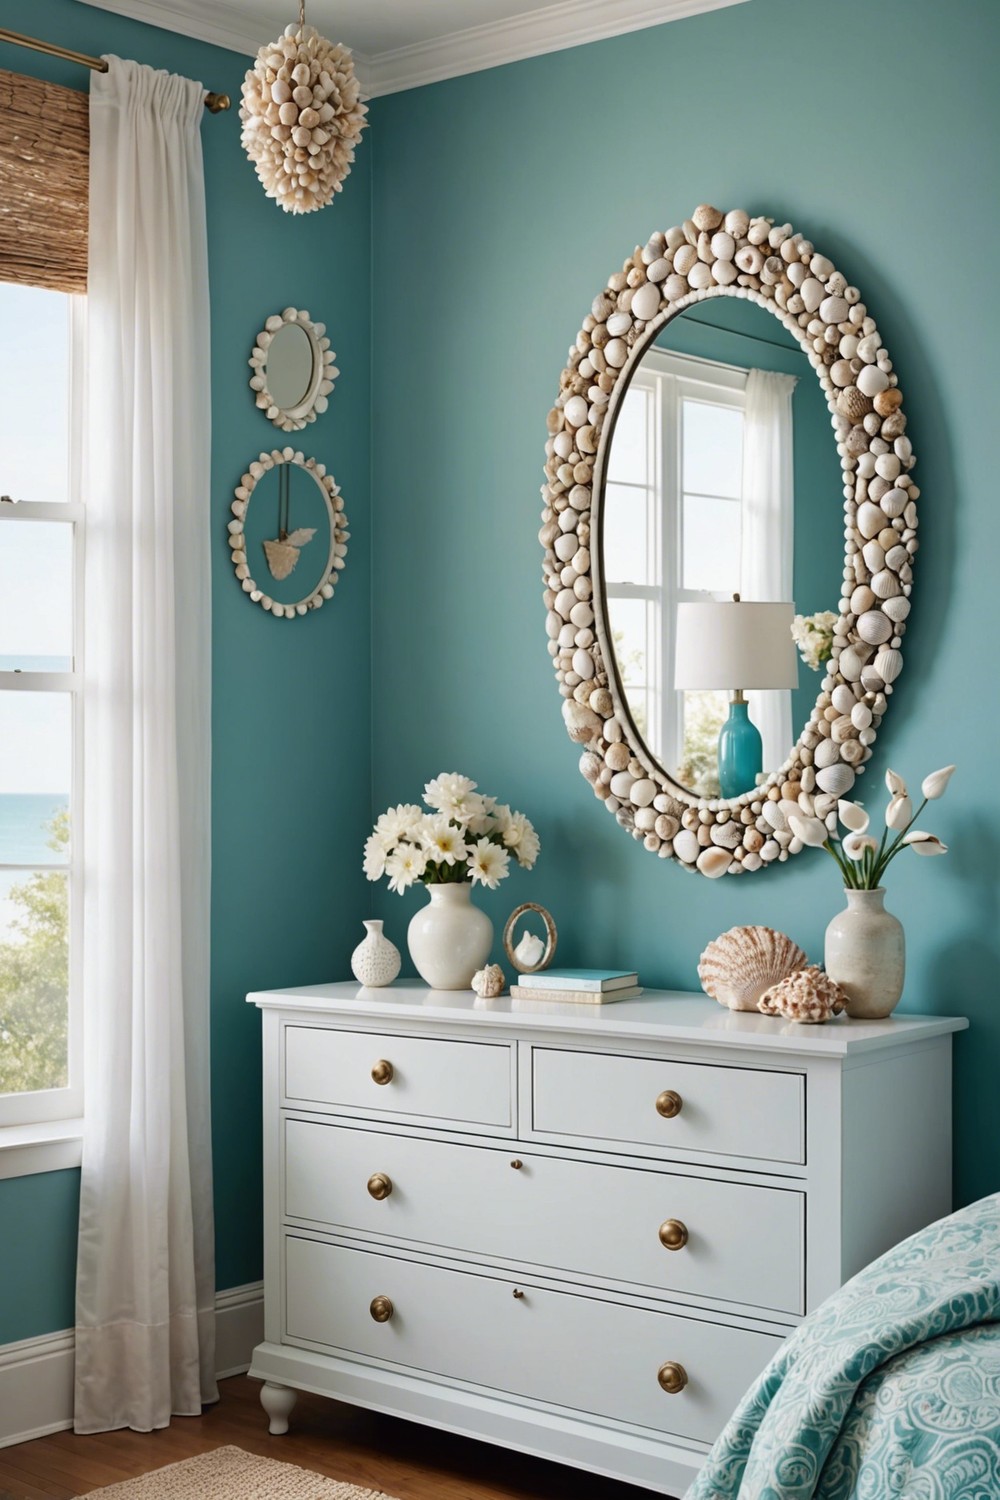 Seashell Accents and Decor